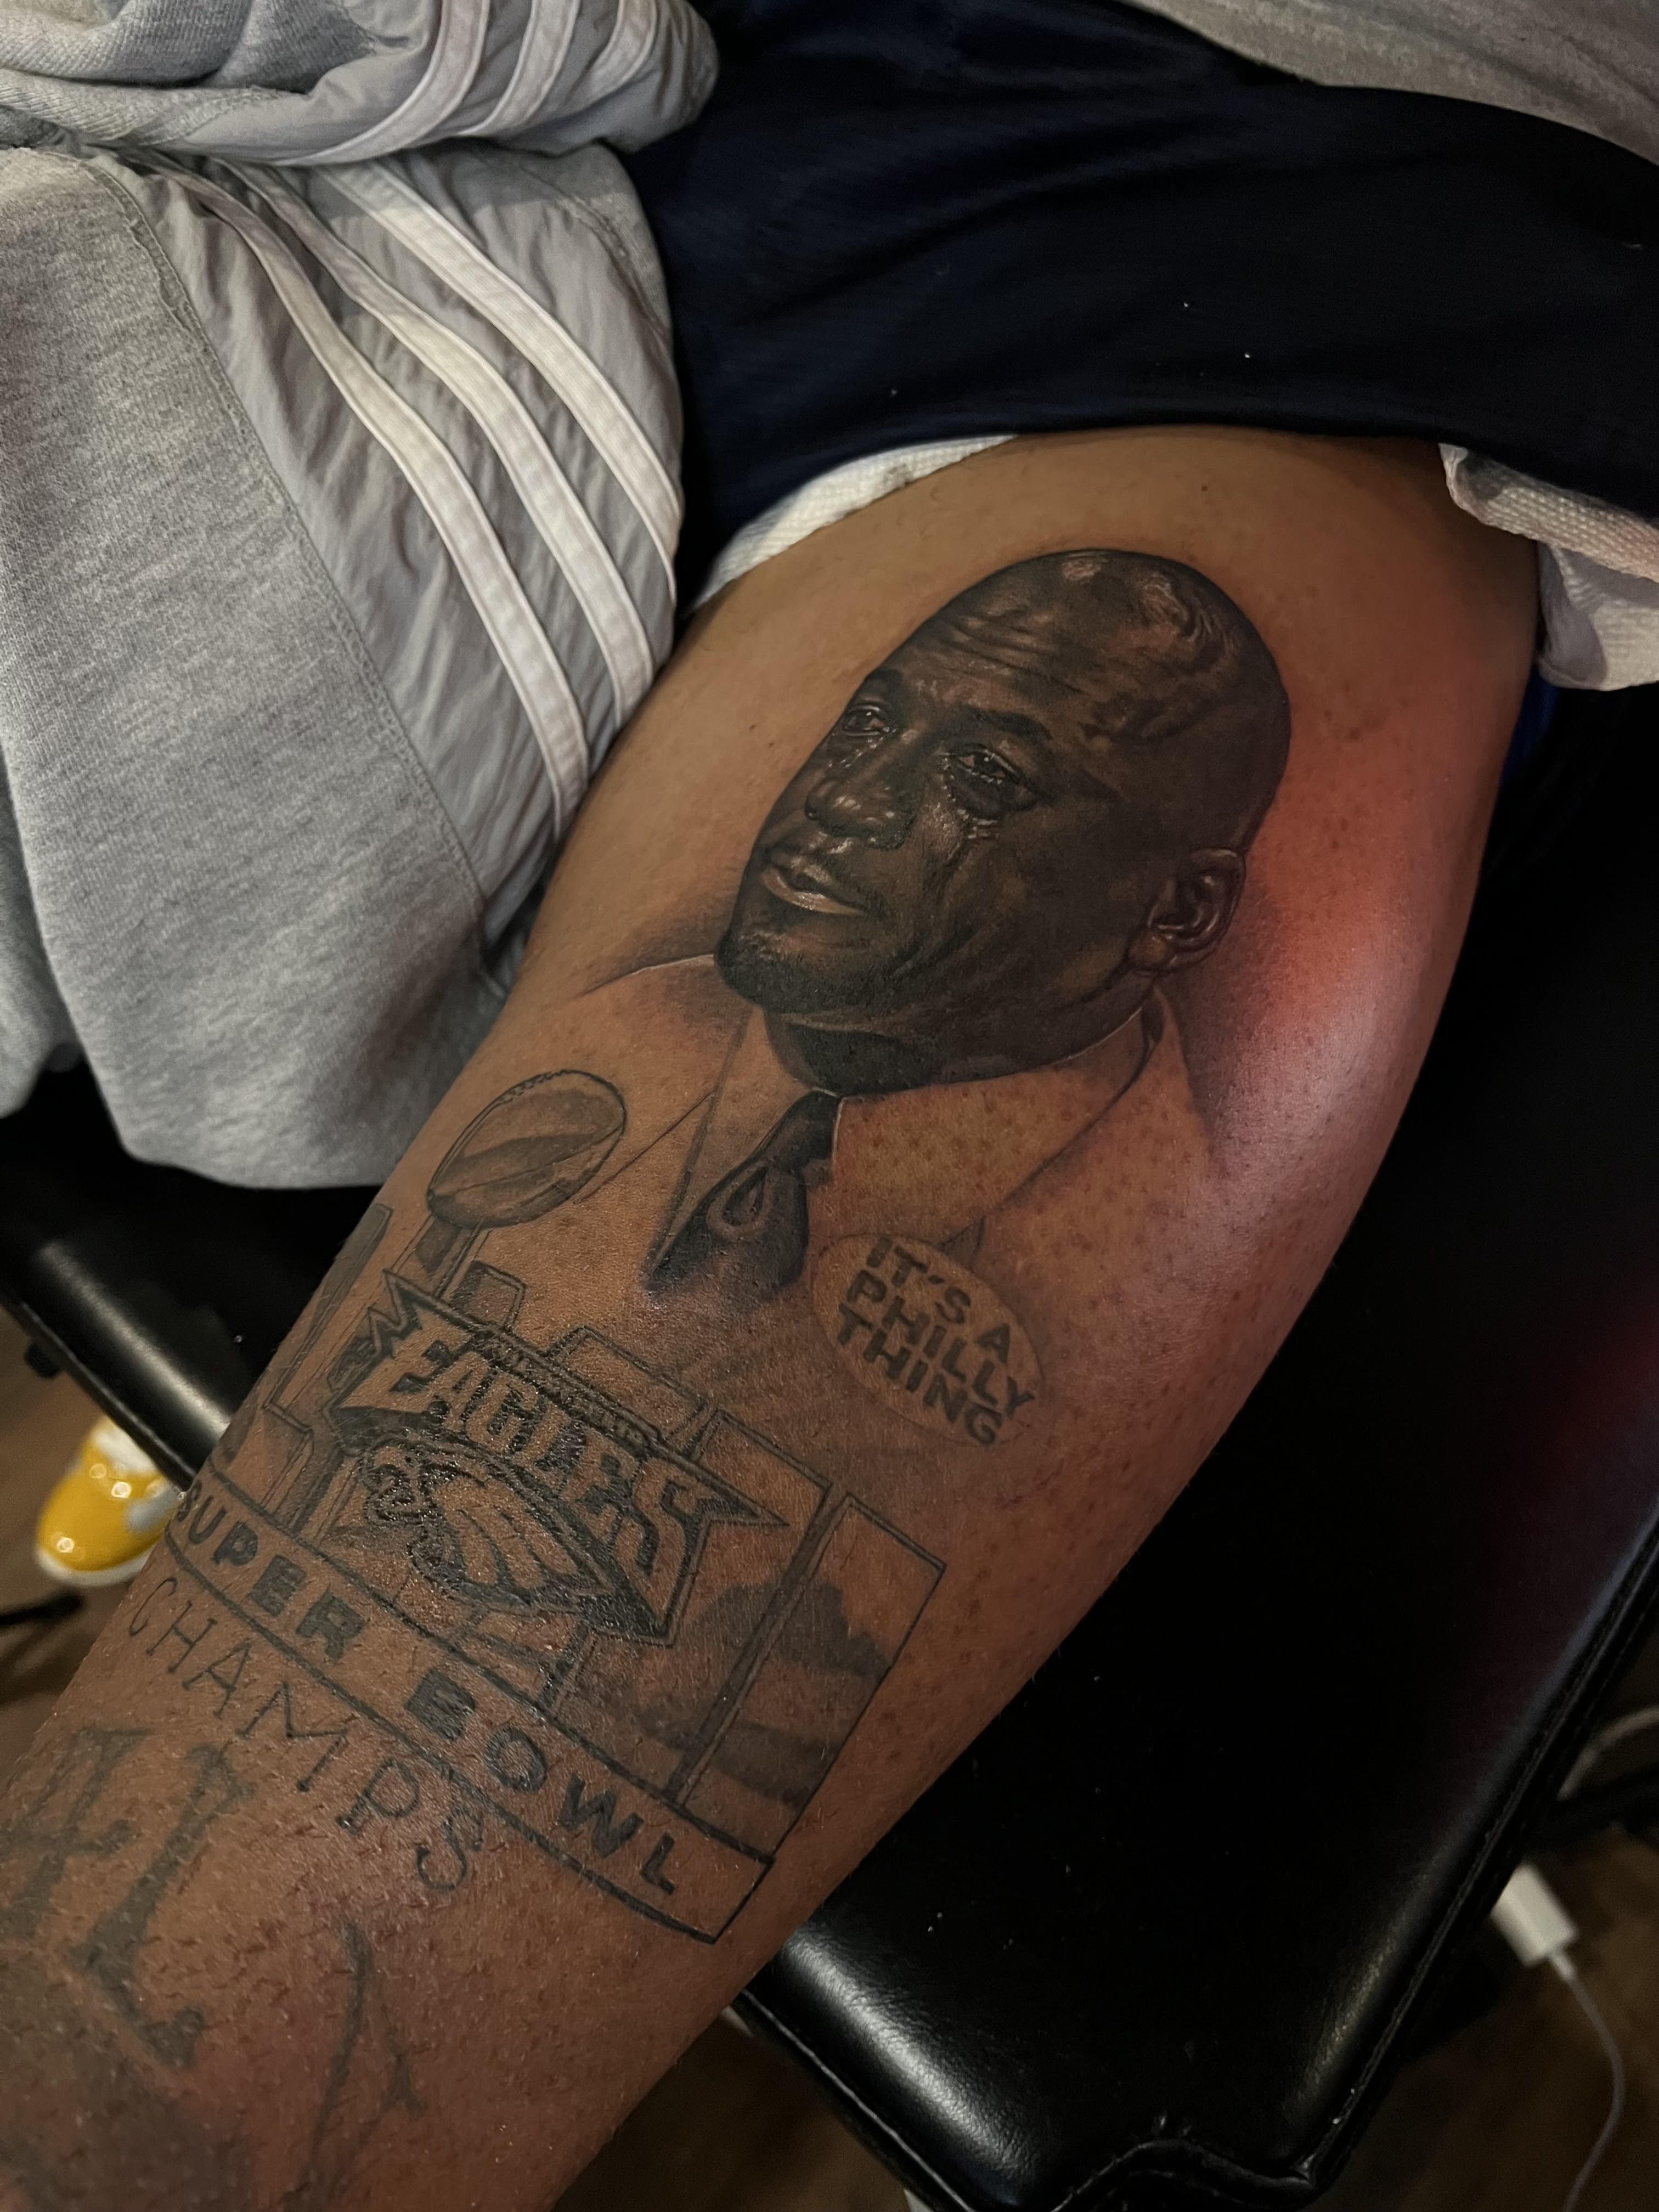 Momentary Ink wants to tattoo 50 Eagles fans for the Super Bowl